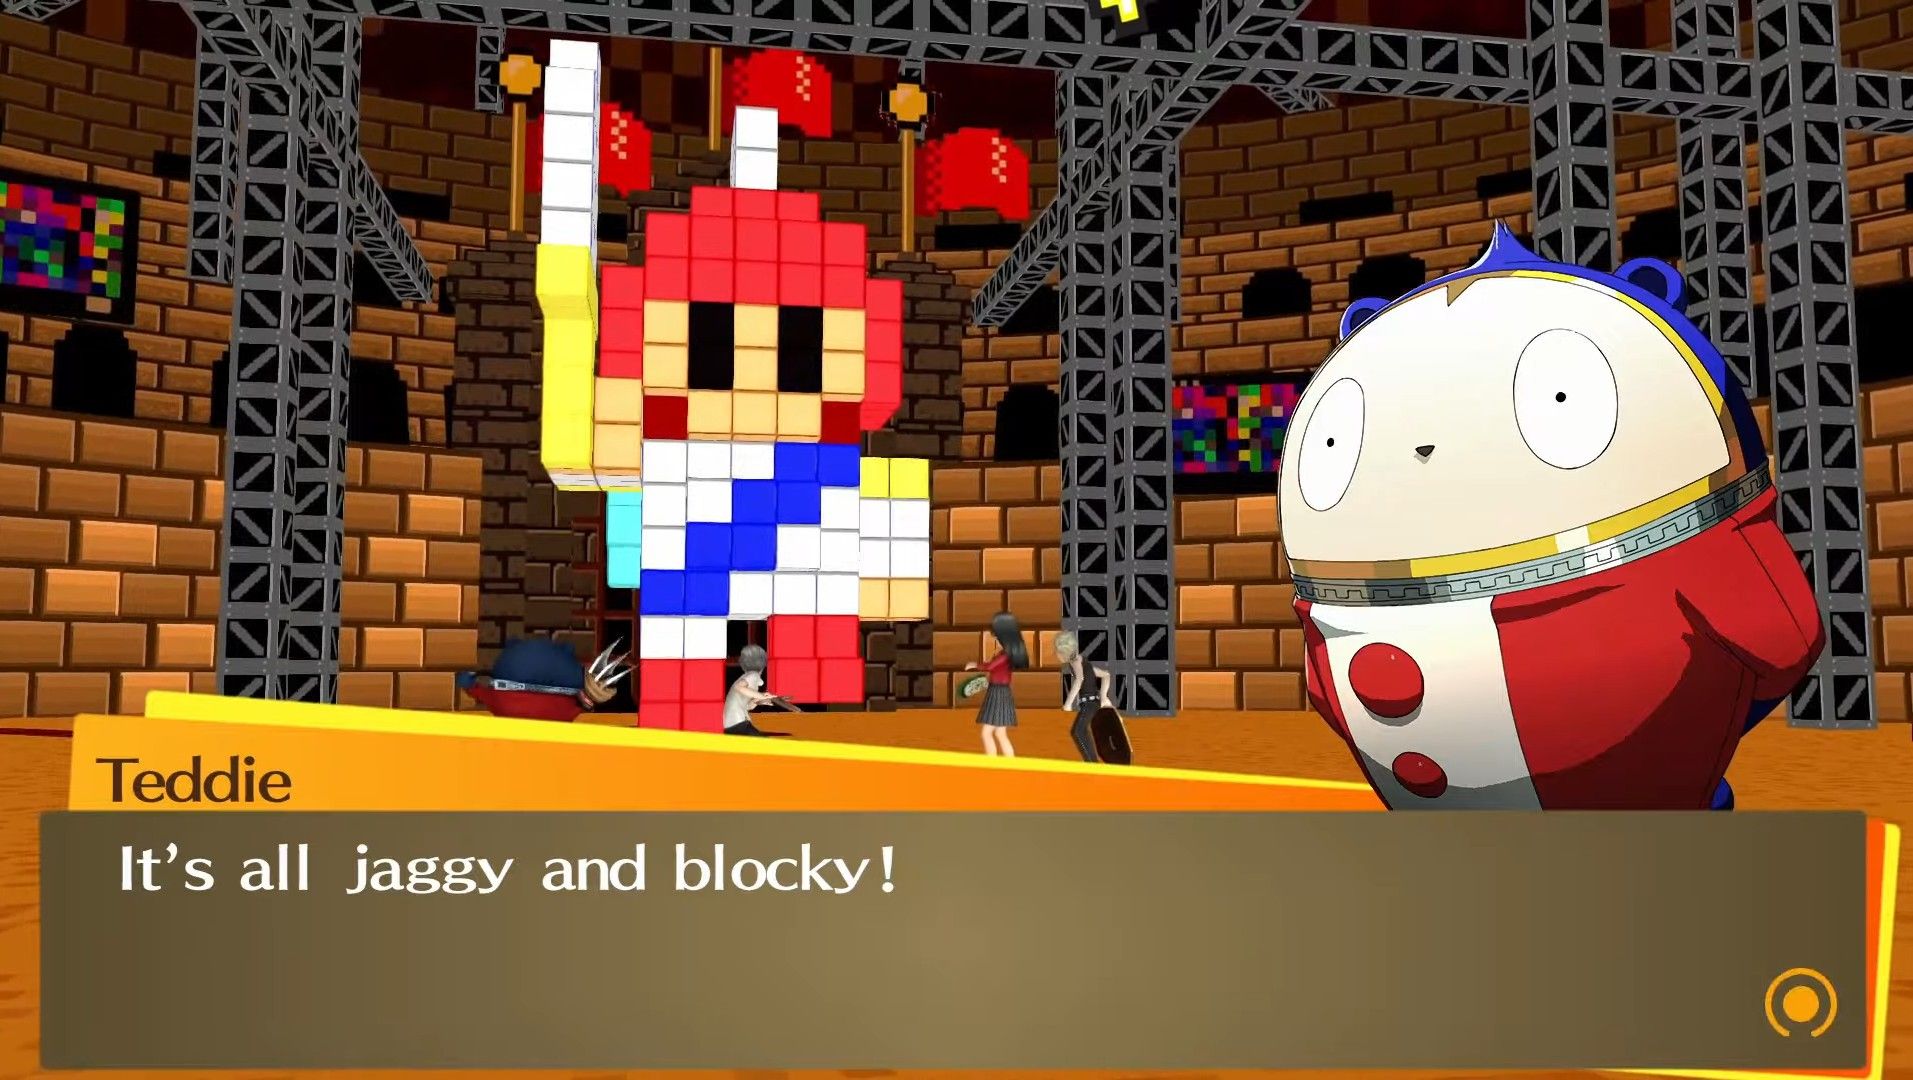 teddie commenting on the pixelation effect on the 8-bit hero in shadow mitsuo's boss fight in persona 4 golden